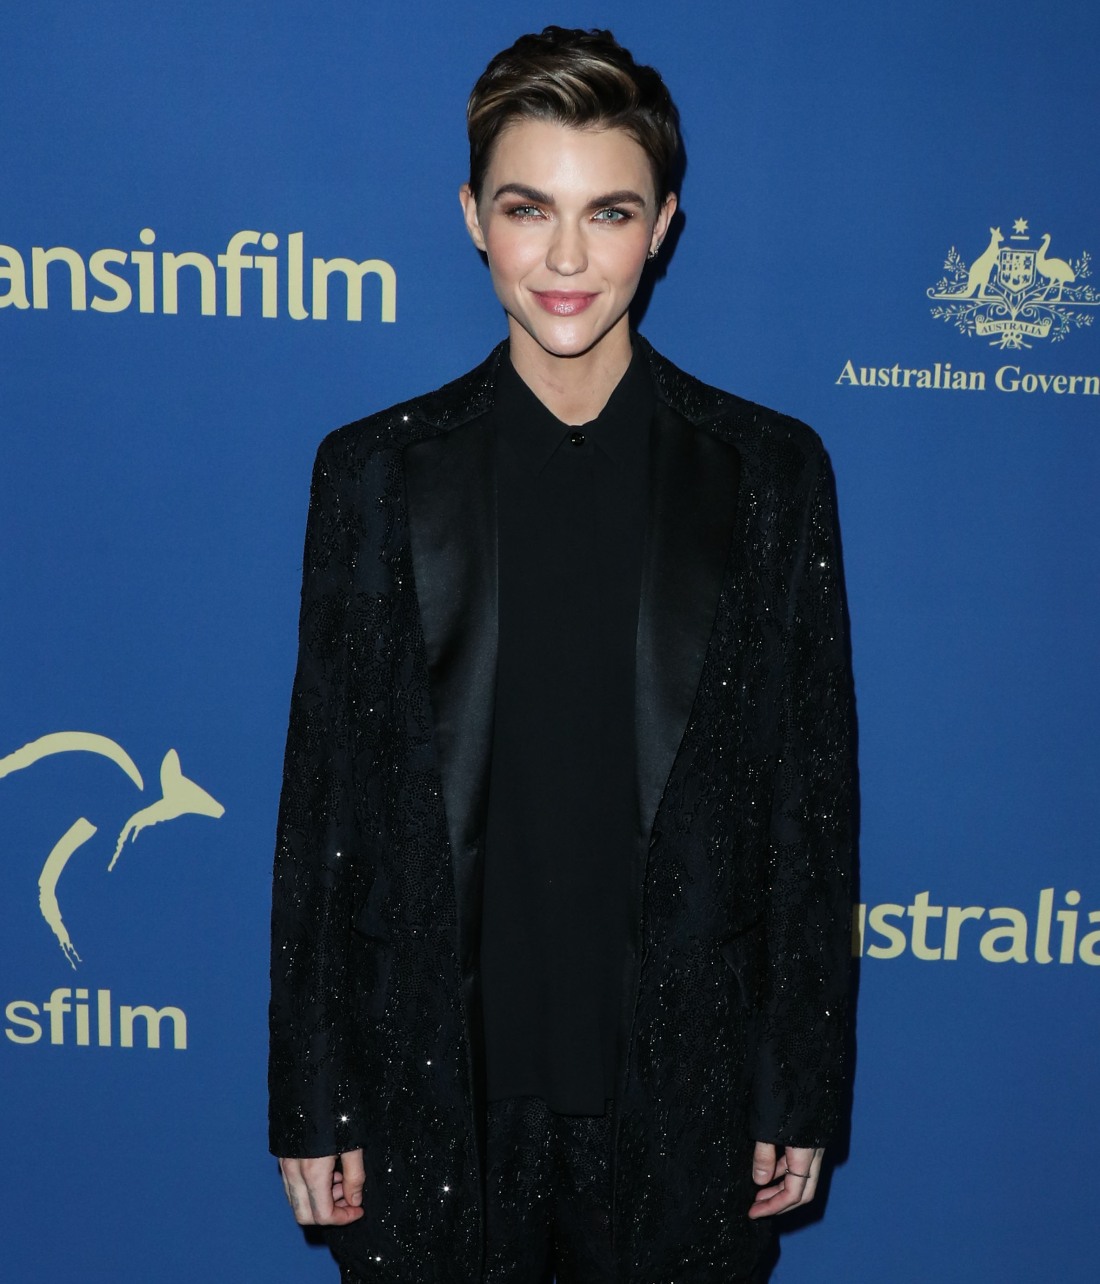 Actress Ruby Rose arrives at the 2019 Australians In Film Awards held at the InterContinental Los Angeles Century City on October 23, 2019 in Century City, Los Angeles, California, United States.